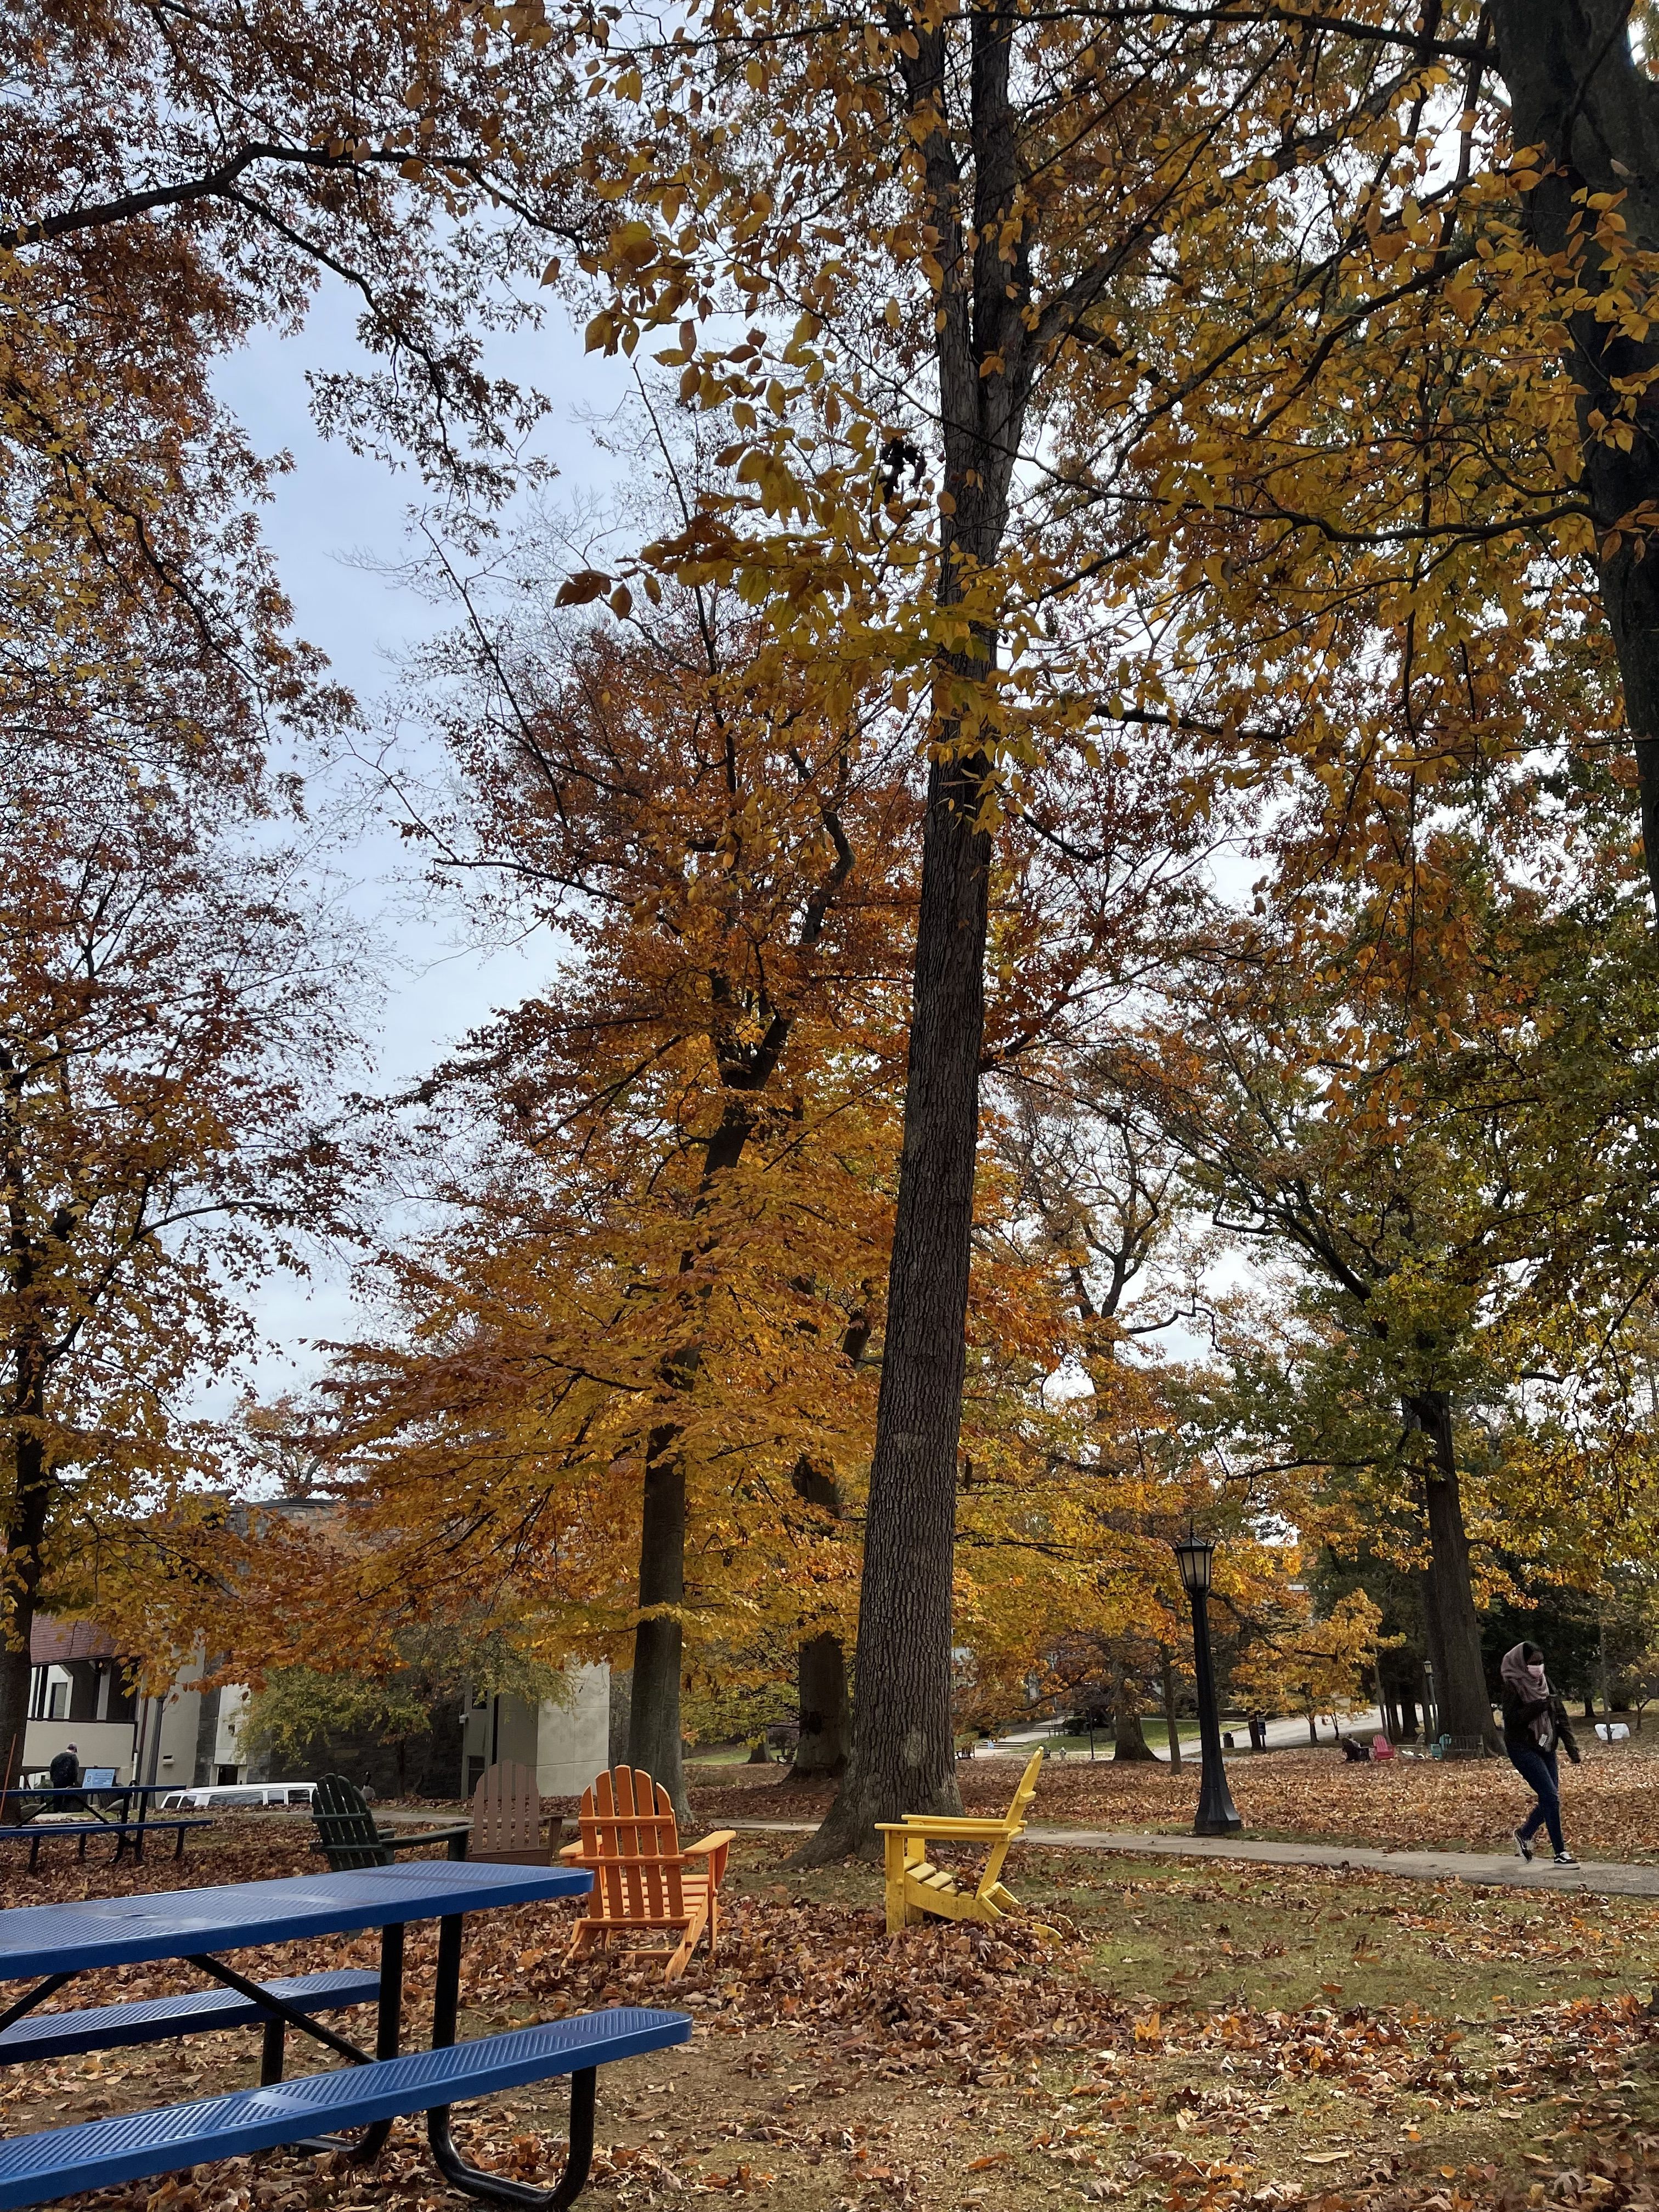 Fall trees and picnic tables in the Cabrini Commons